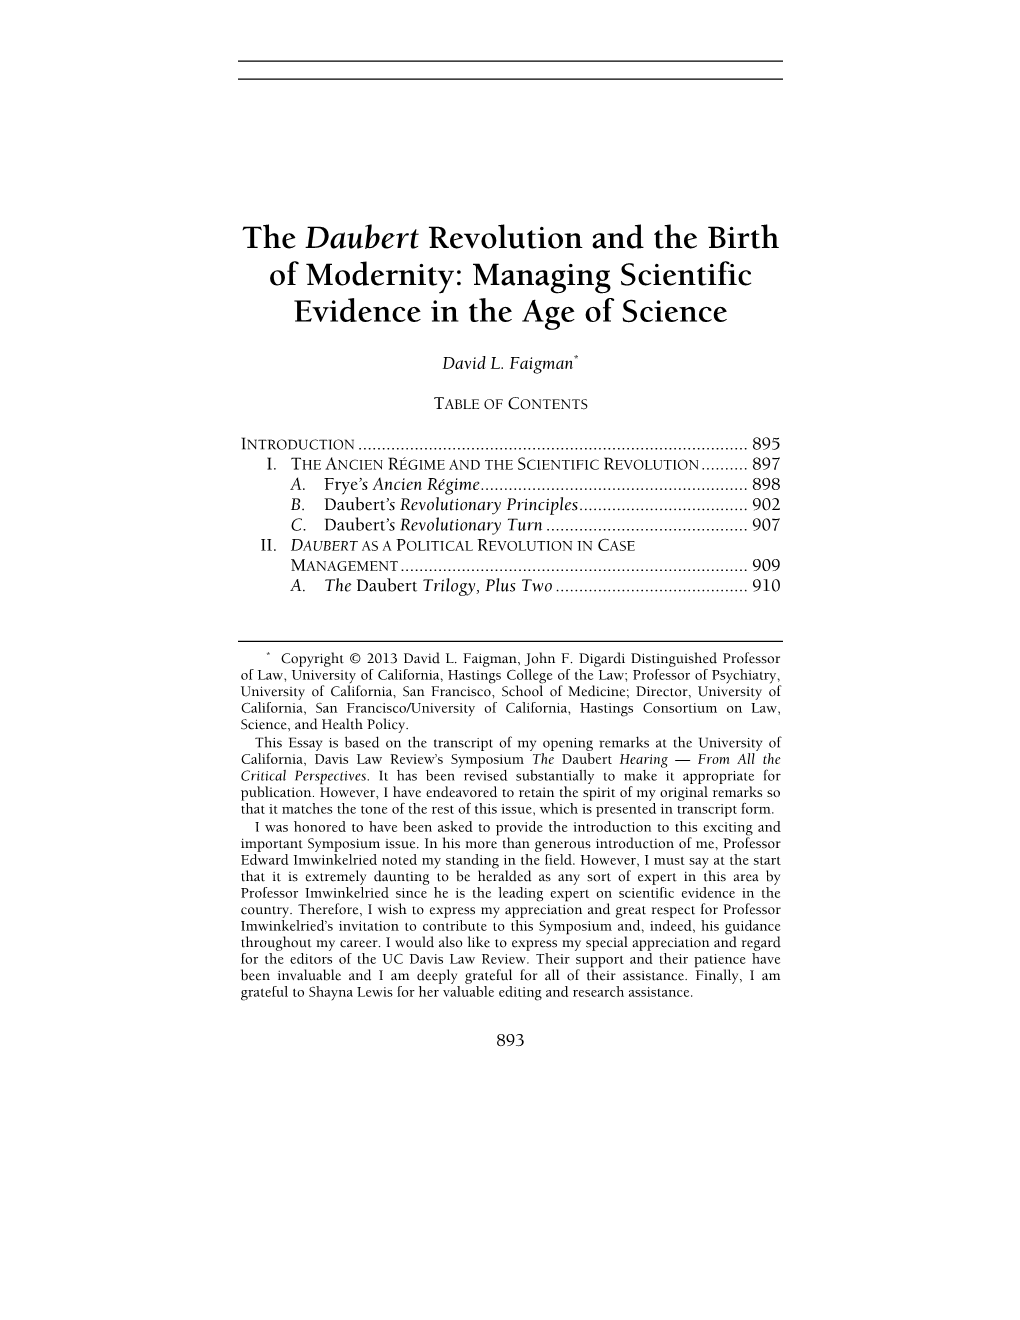 The Daubert Revolution and the Birth of Modernity: Managing Scientific Evidence in the Age of Science